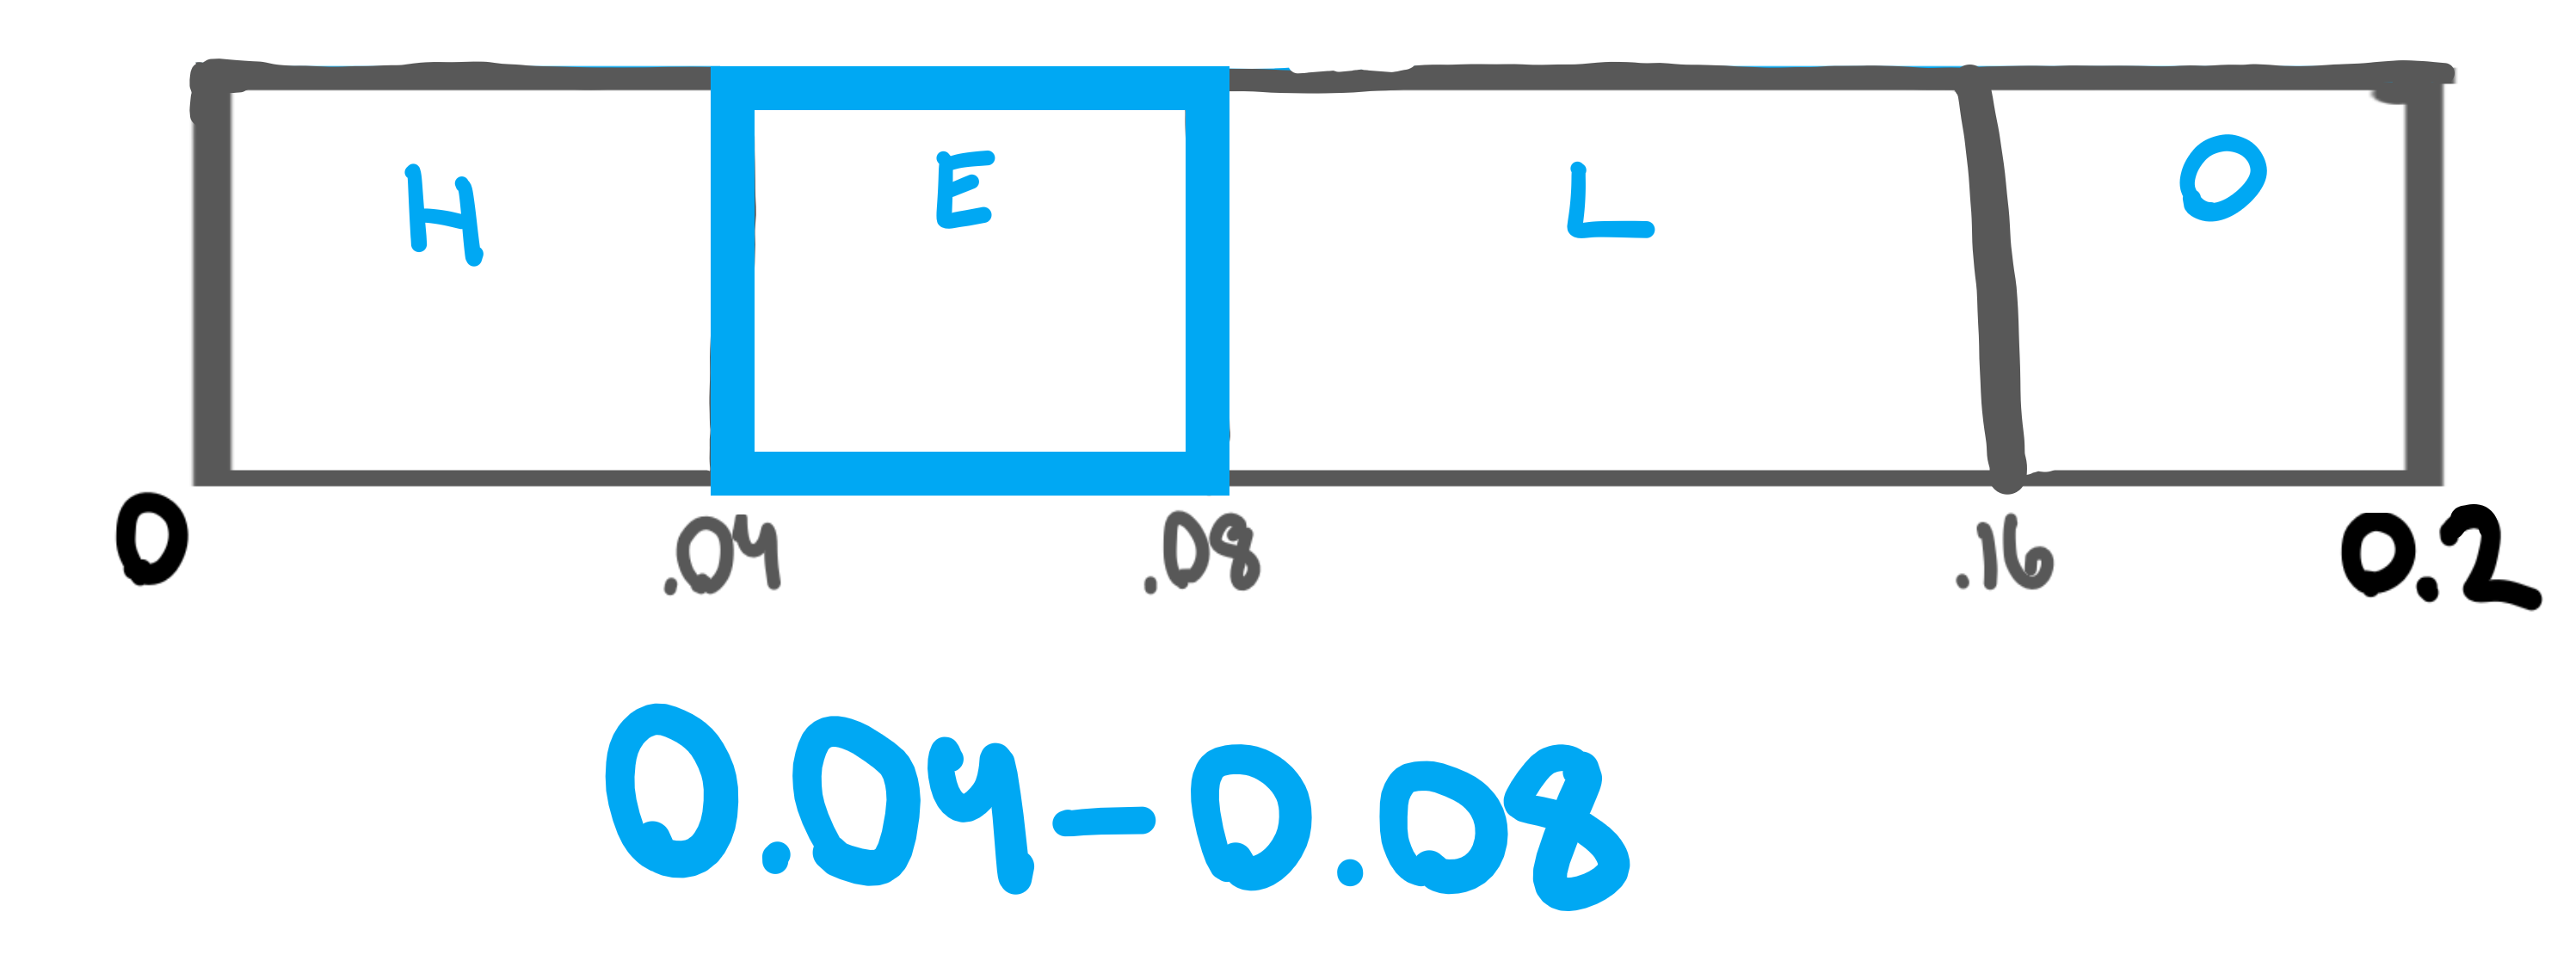 Arithmetic number line with the range of 0-0.2 with "HE" encoded